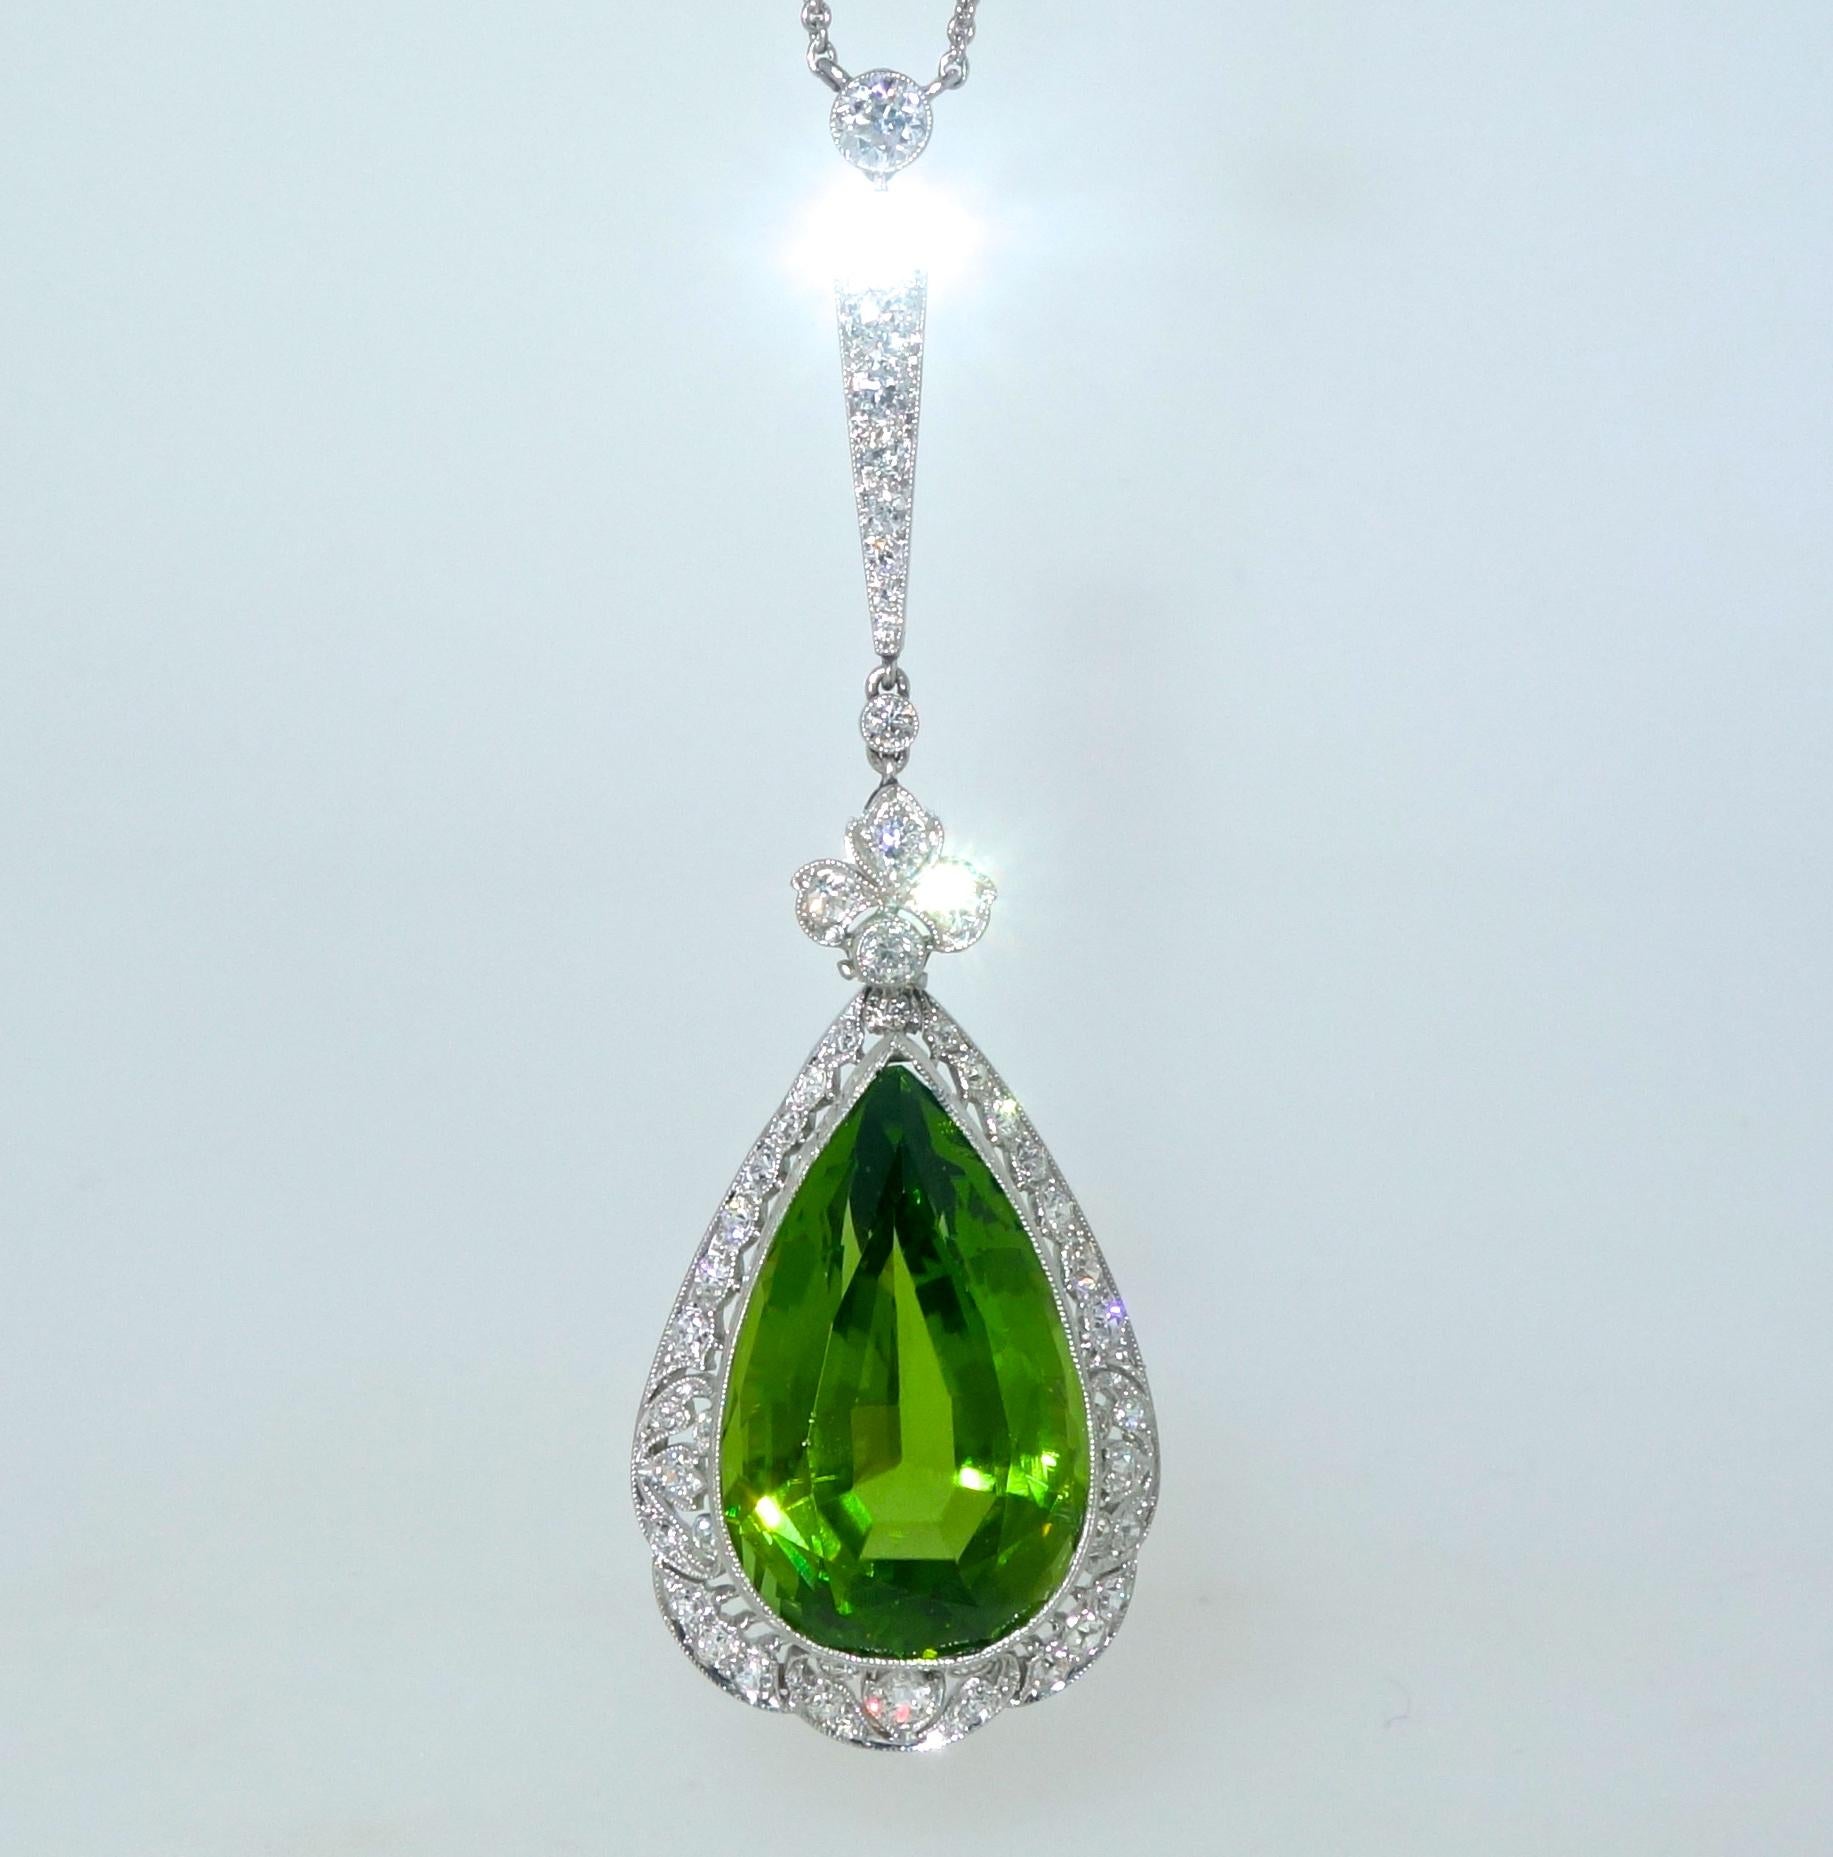 Edwardian pendant necklace centering a fine natural bright green peridot weighing approximately 19.5 cts.  Surrounding this pear cut stone are numerous European cut diamonds weighing approximately 1.6 cts.  This hand made platinum piece shows